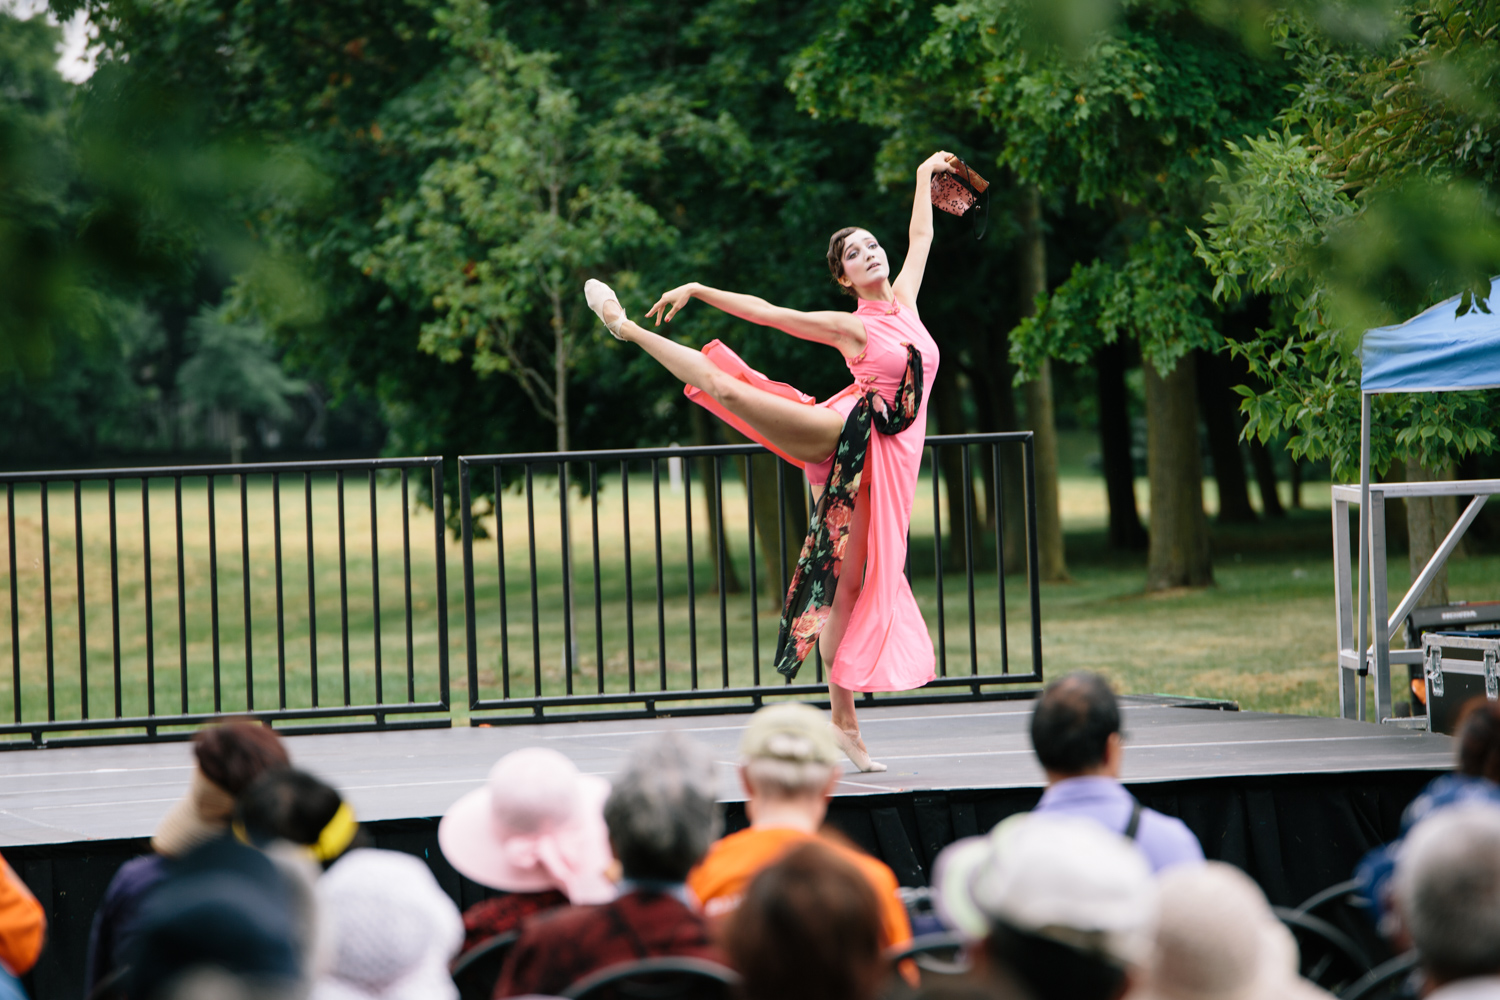 A woman in a pink costume raises her leg as she dances on stage in front of the audience.